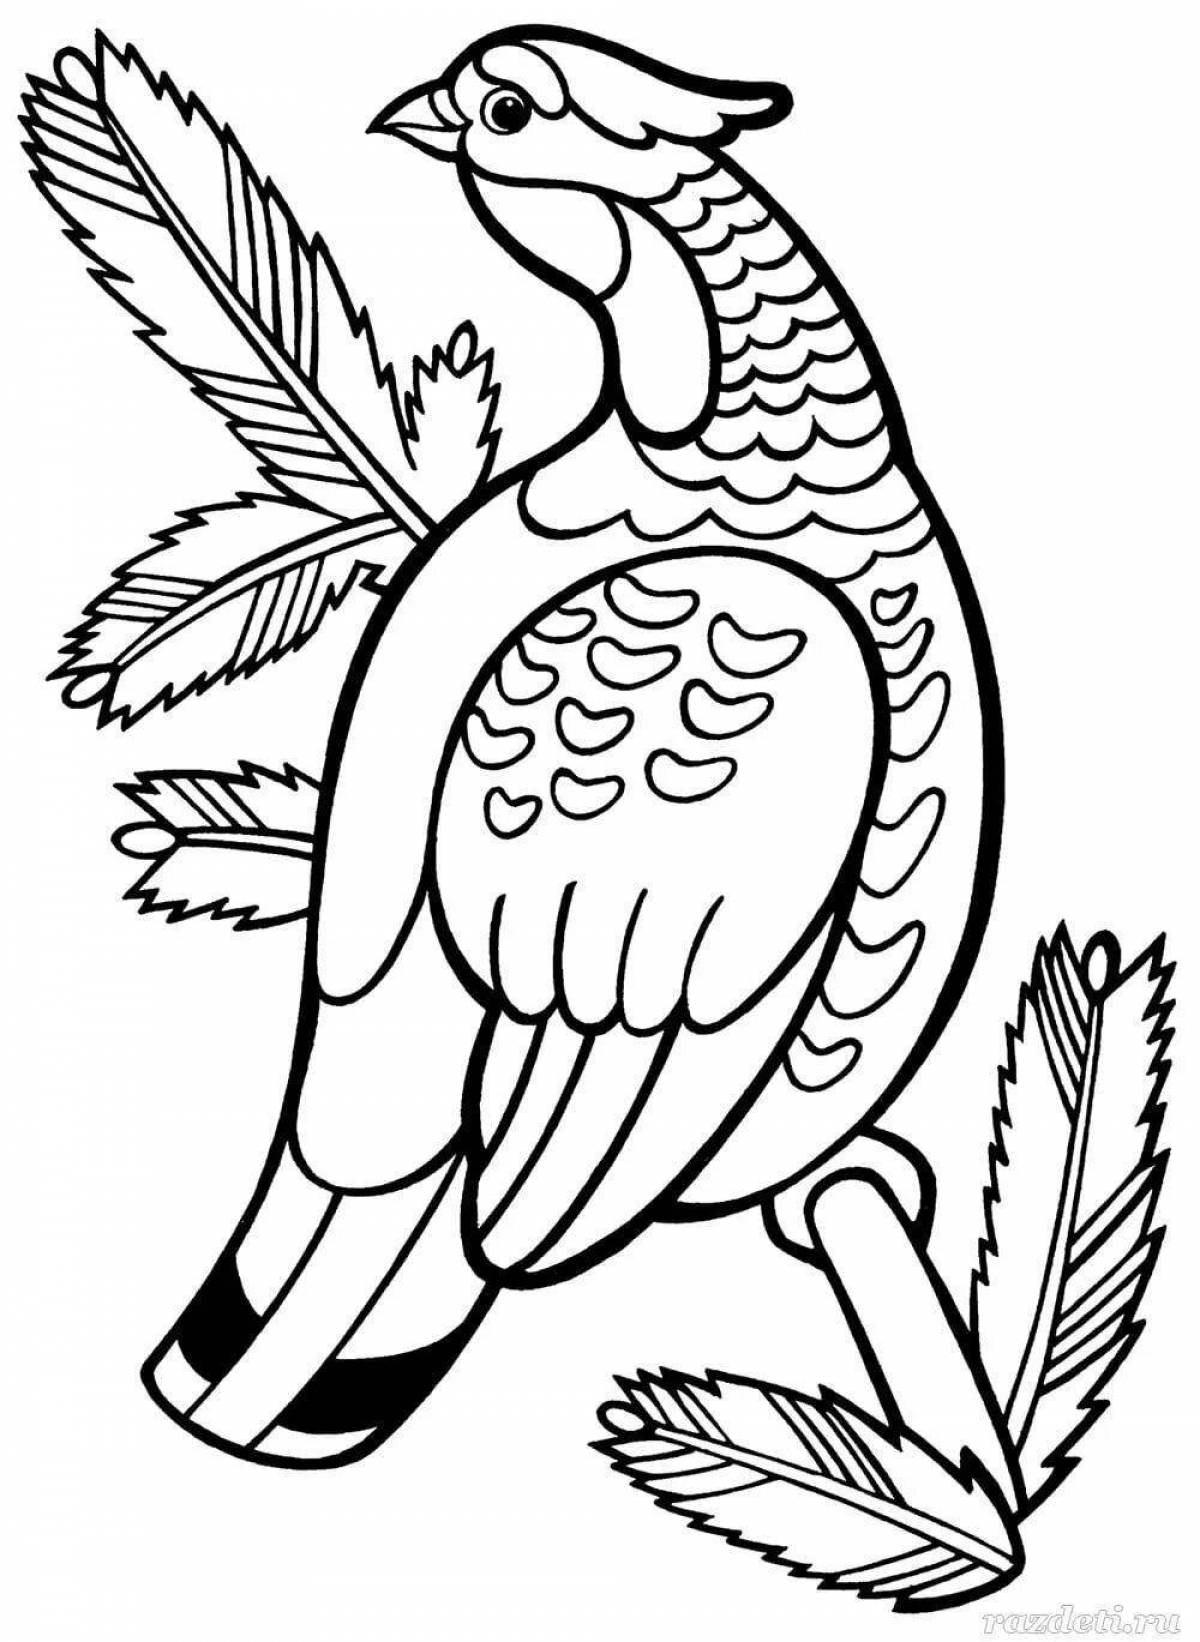 Coloring book bright black grouse